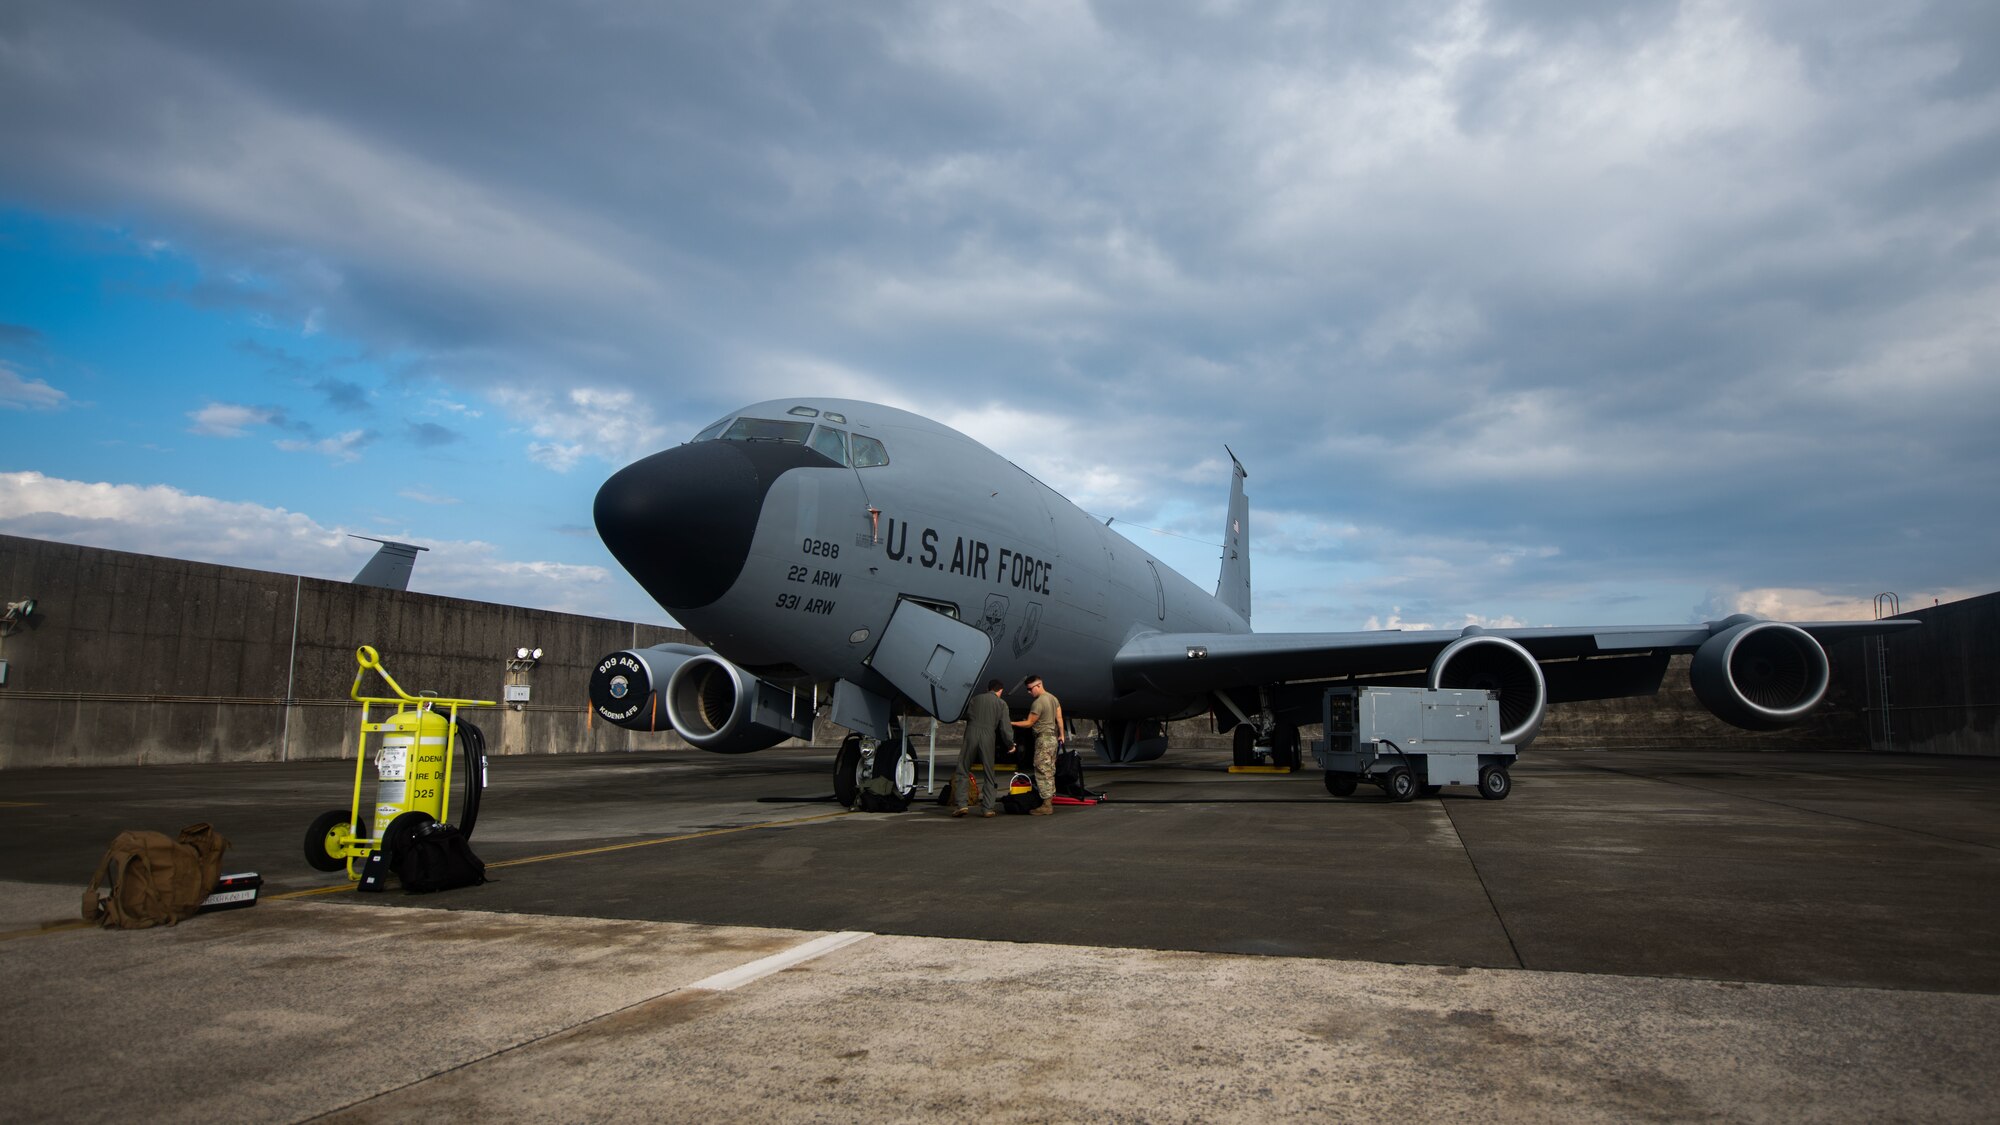 Airmen, assigned to the 909th Air Refueling Squadron, prepare a KC-135 Stratotanker for a refuel mission at Kadena Air Base, Japan, Sept. 9, 2022. The 909th ARS is the Pacific Air Forces lead force for aerial refueling operations in the Indo-Pacific theater, supporting U.S. forces and regional Allies and partners. (U.S. Air Force photo by Senior Airman Gary Hilton)